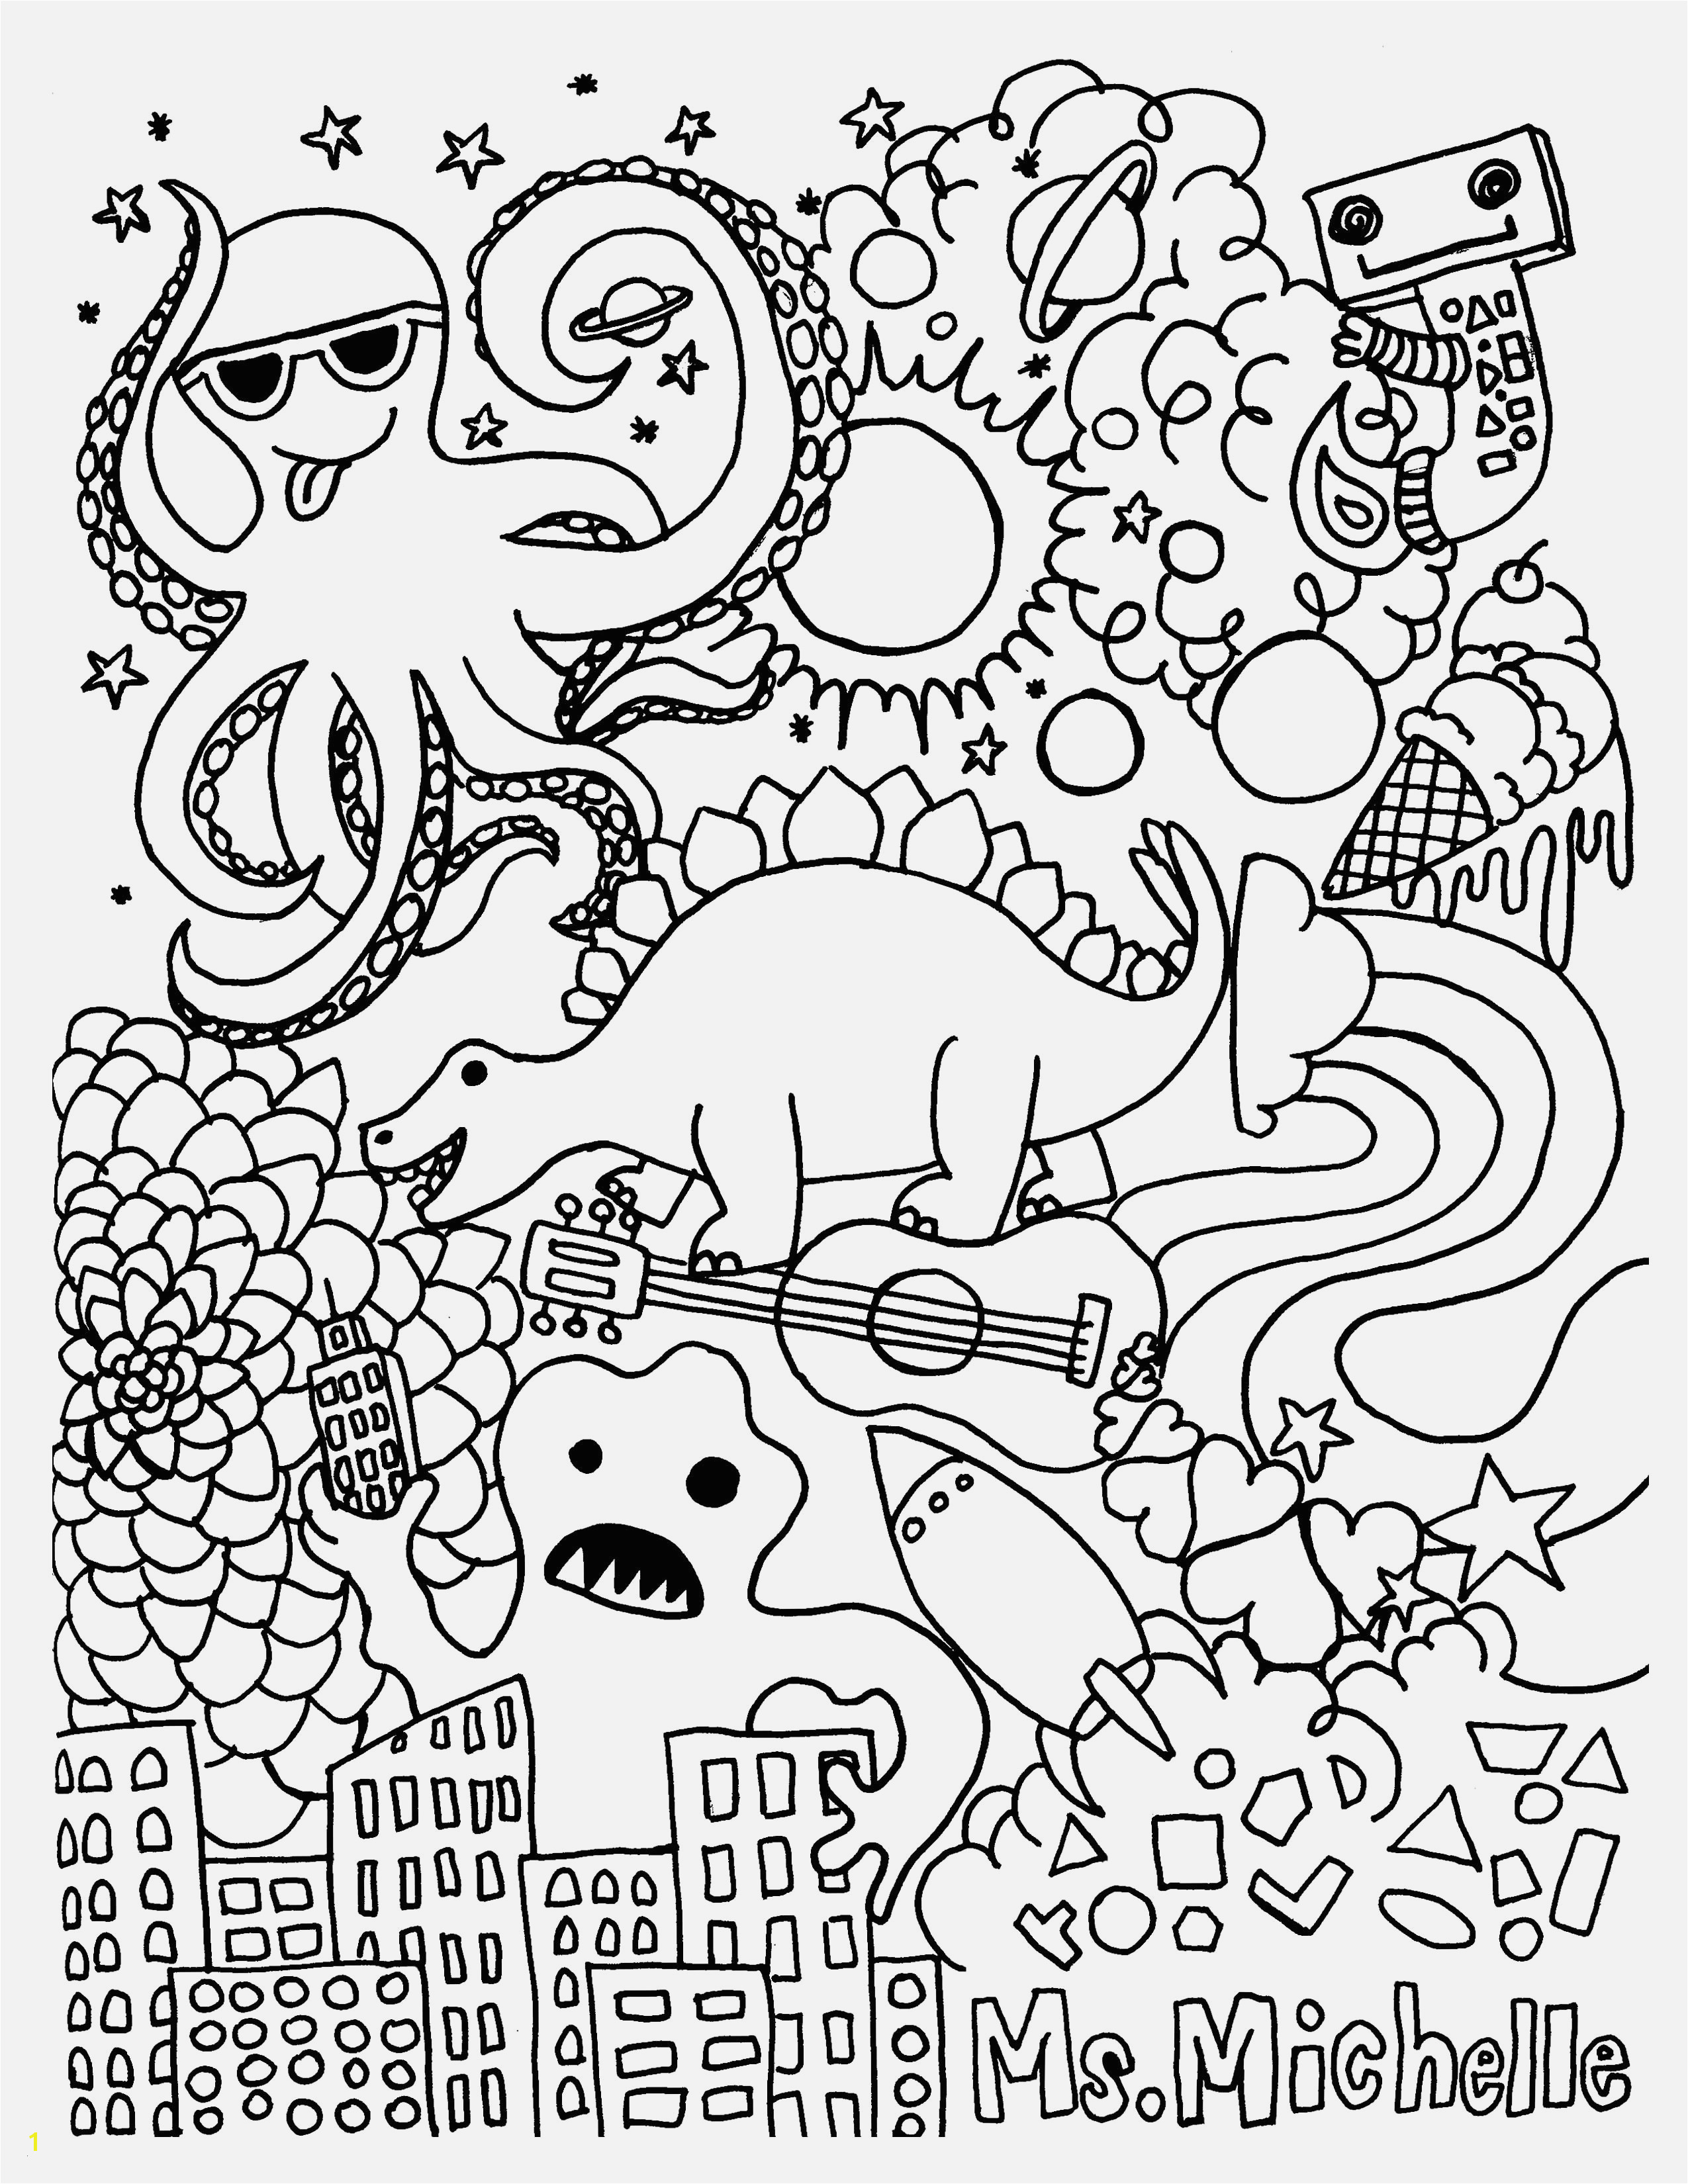 Easy Adult Coloring Pages Free Coloring Pages for Children Best Free Coloring Pages for Easy